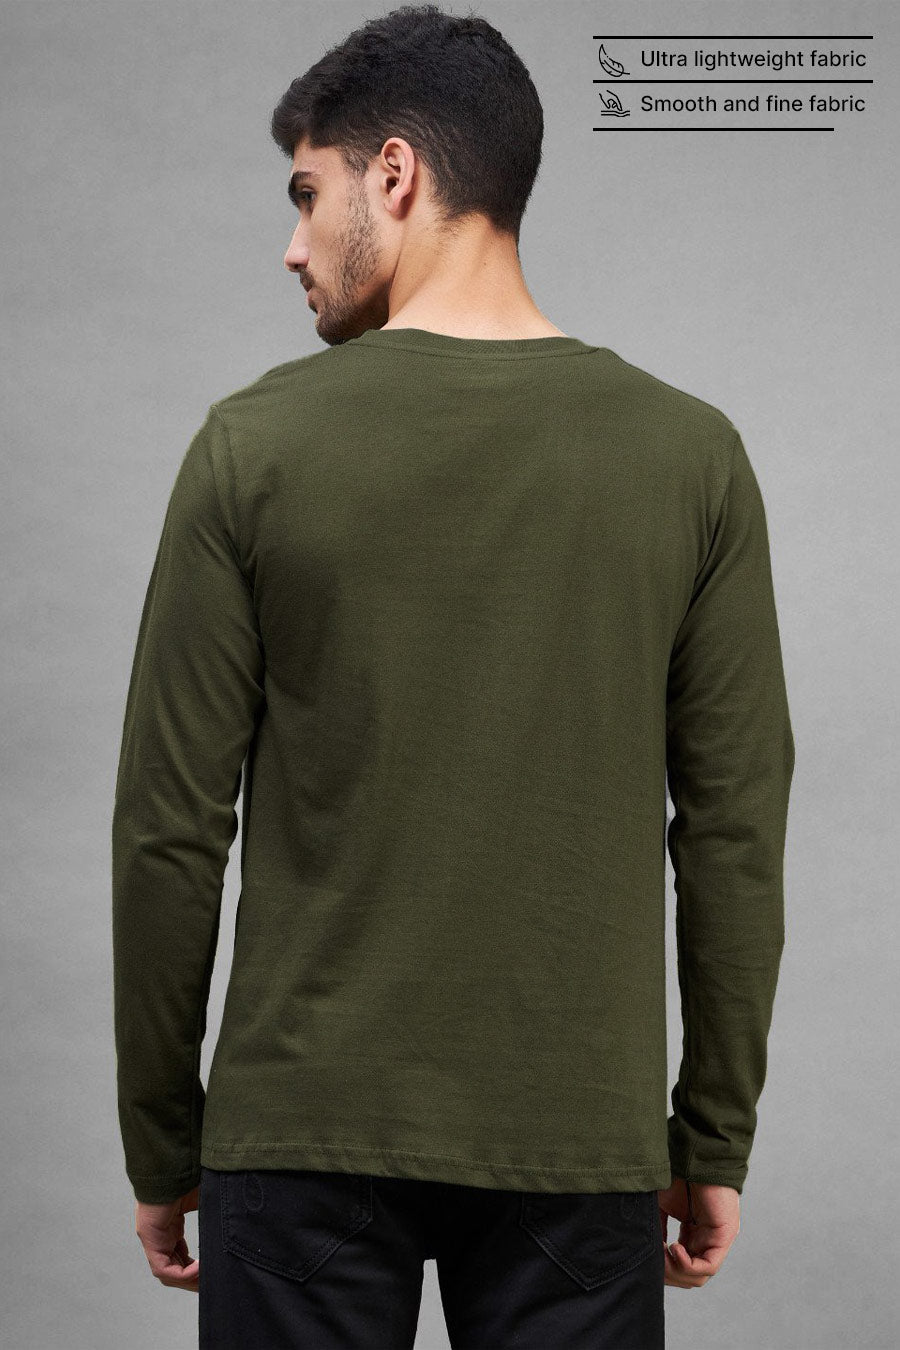 Classic Full sleeve in Olive